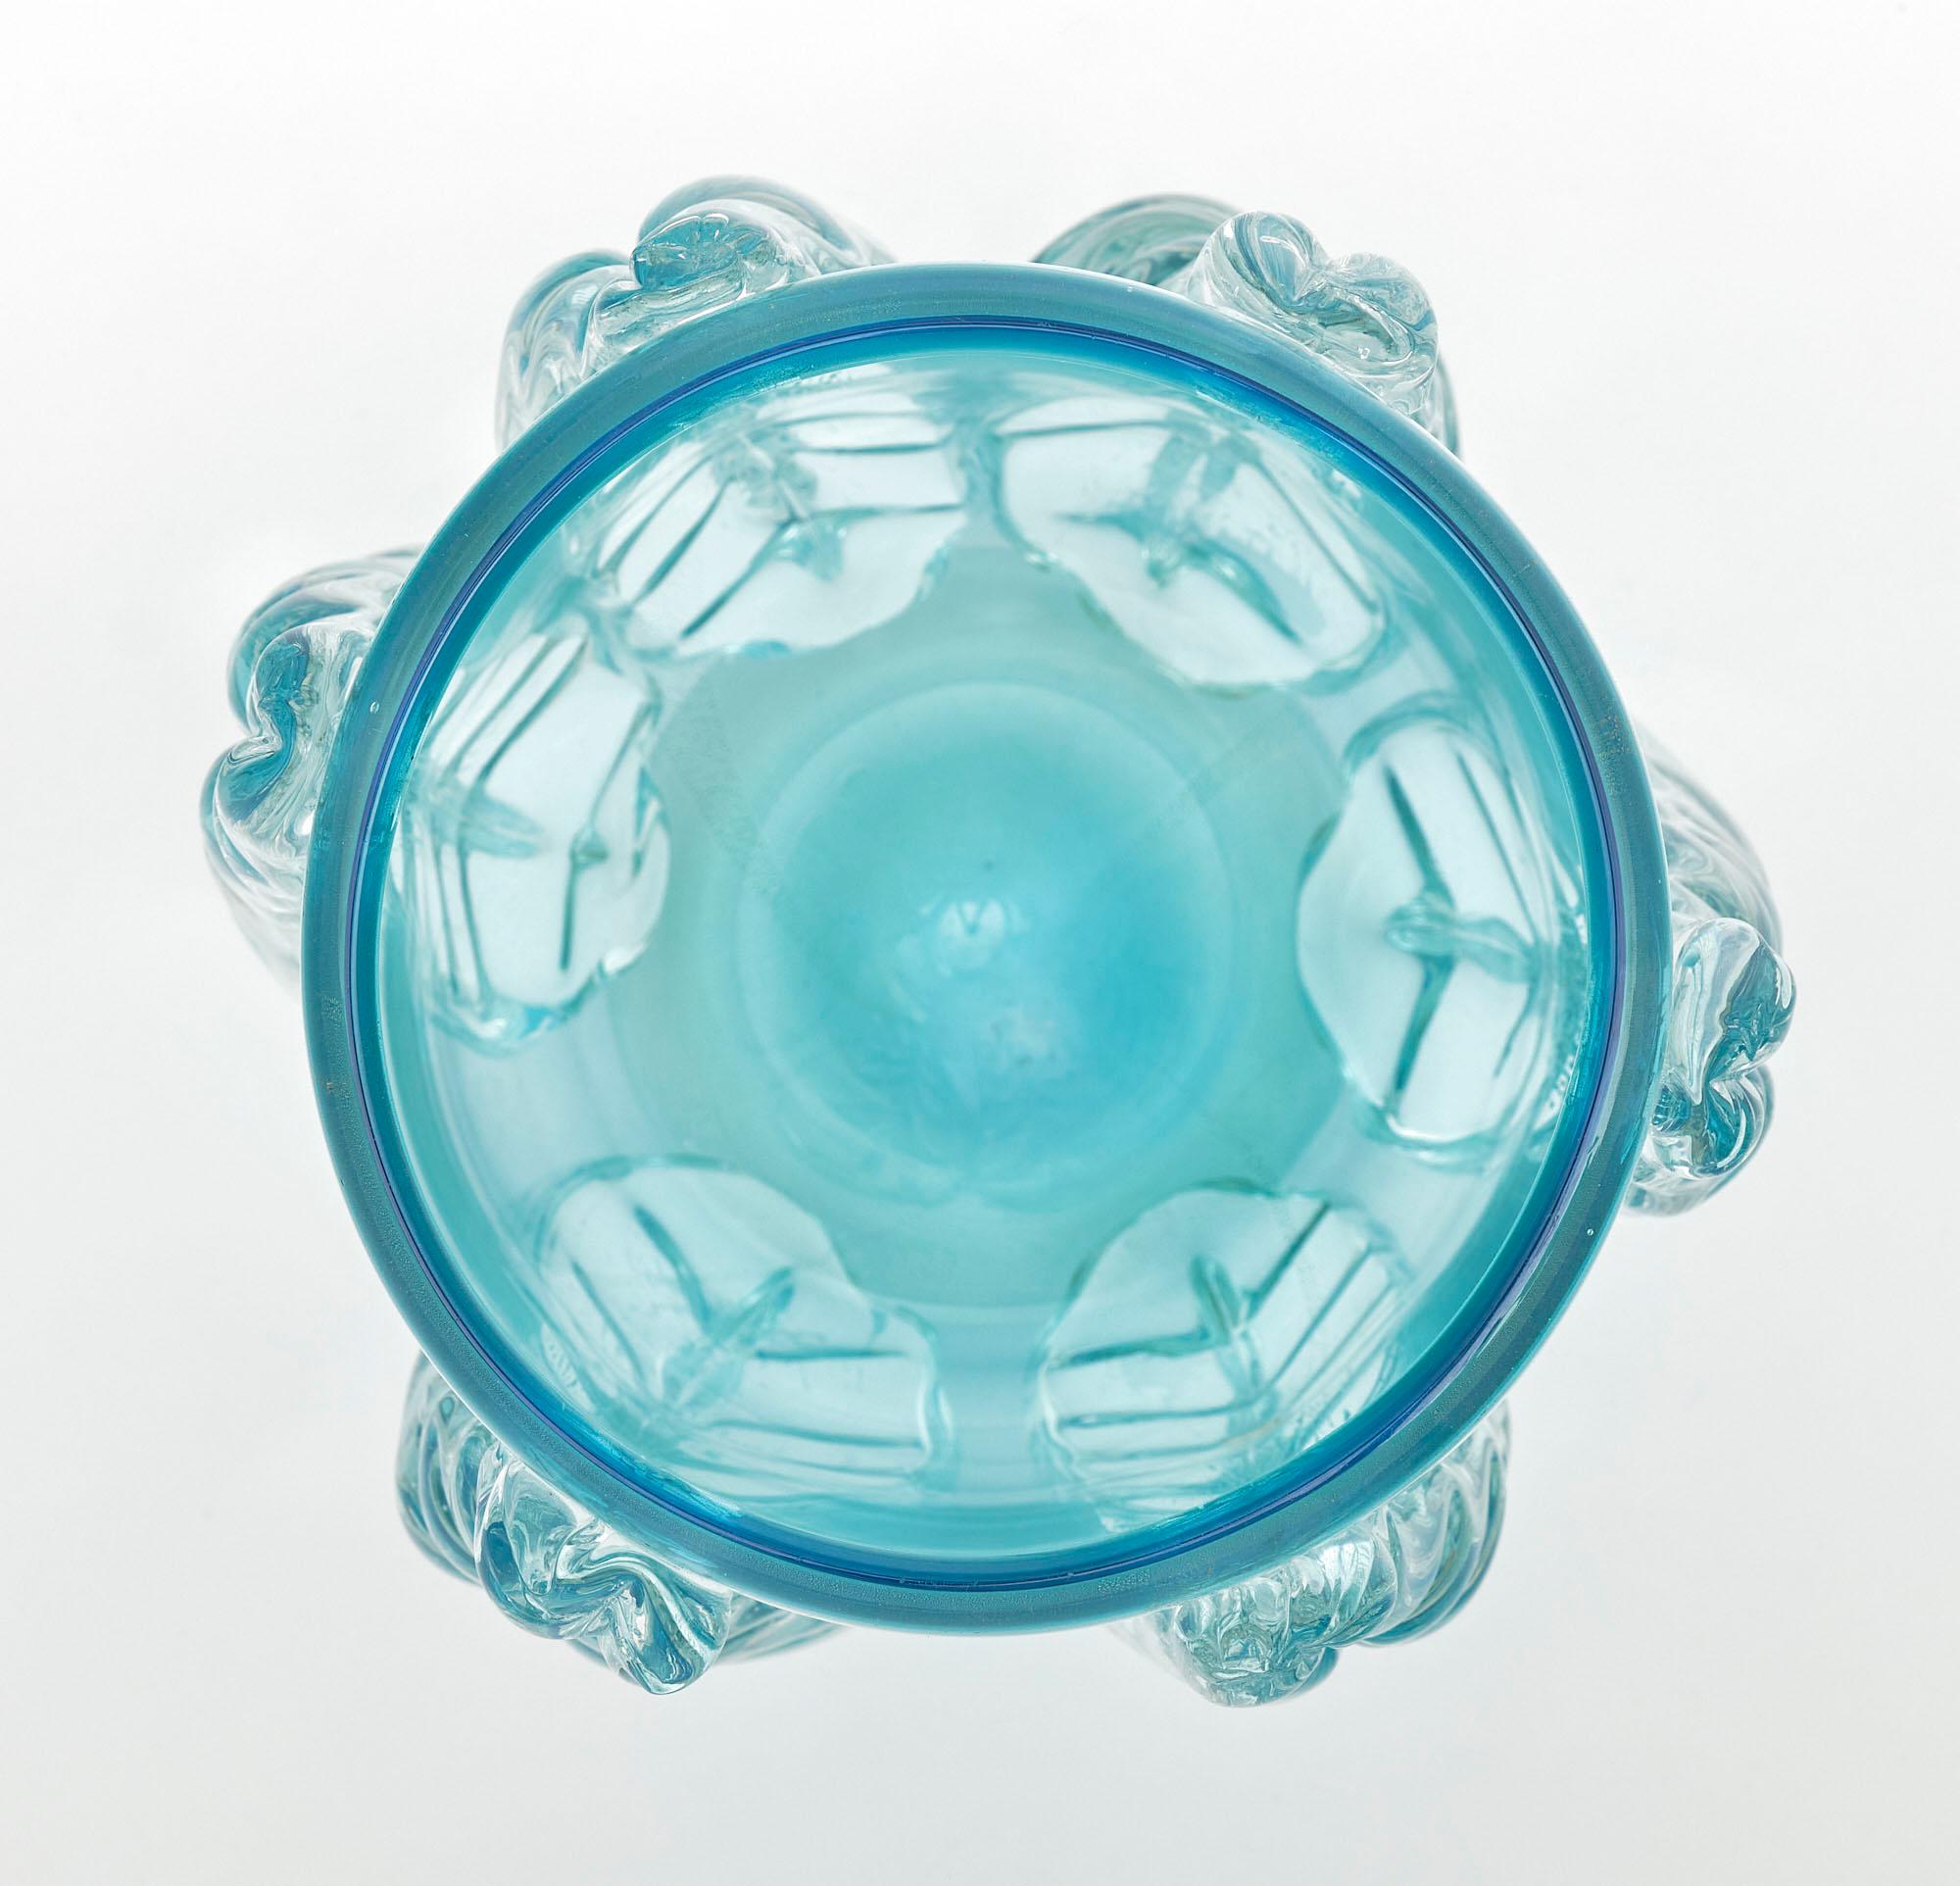 Vase from the island of Murano made of hand-blown aqua glass. This important piece has stylized acanthus leaves and a striking presence!